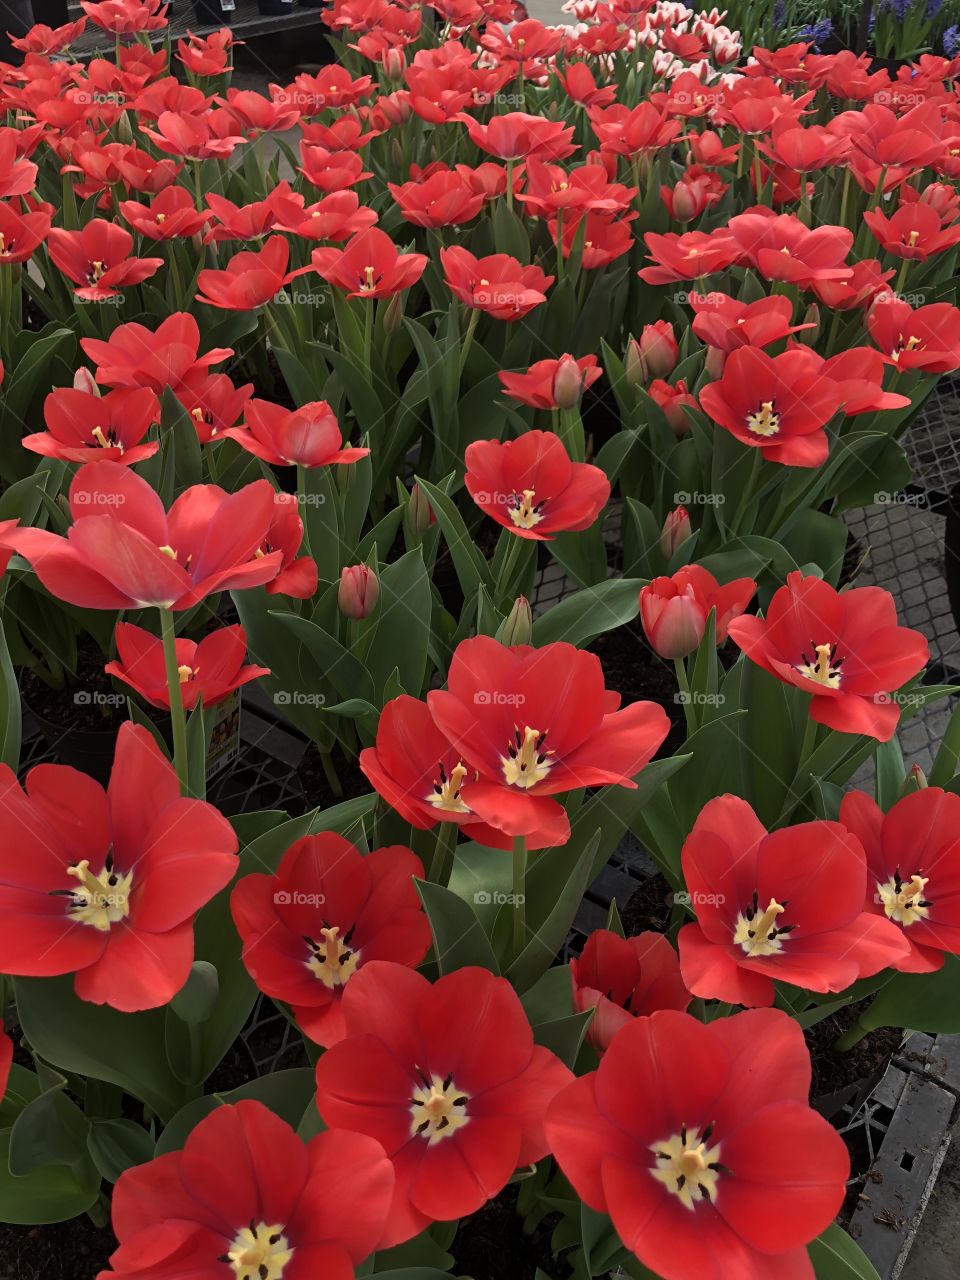 Bright red closeup of many blooming tulips